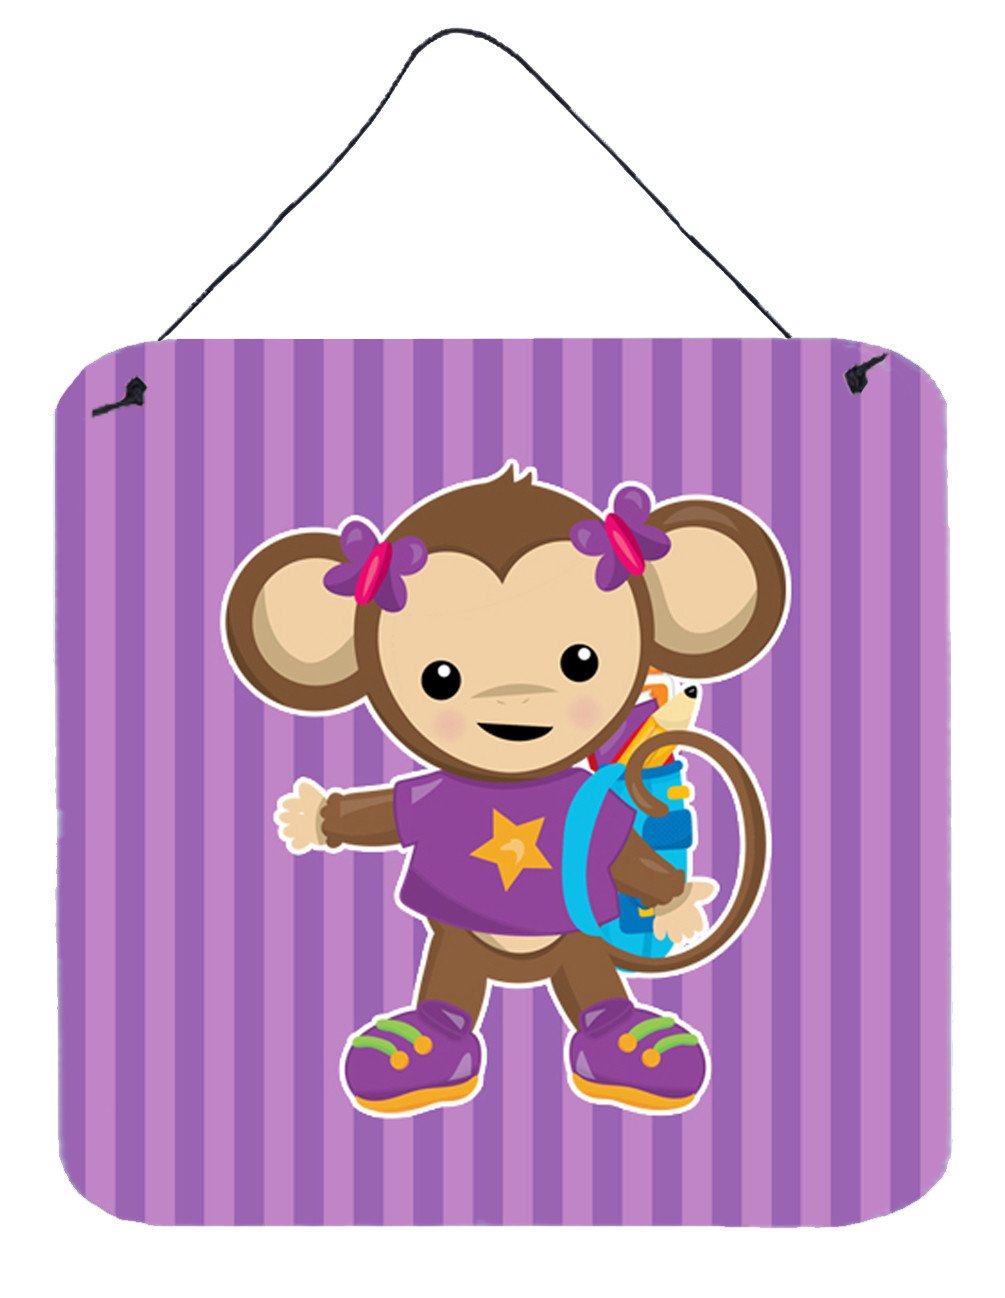 Monkey with Backpack Wall or Door Hanging Prints BB7017DS66 by Caroline's Treasures